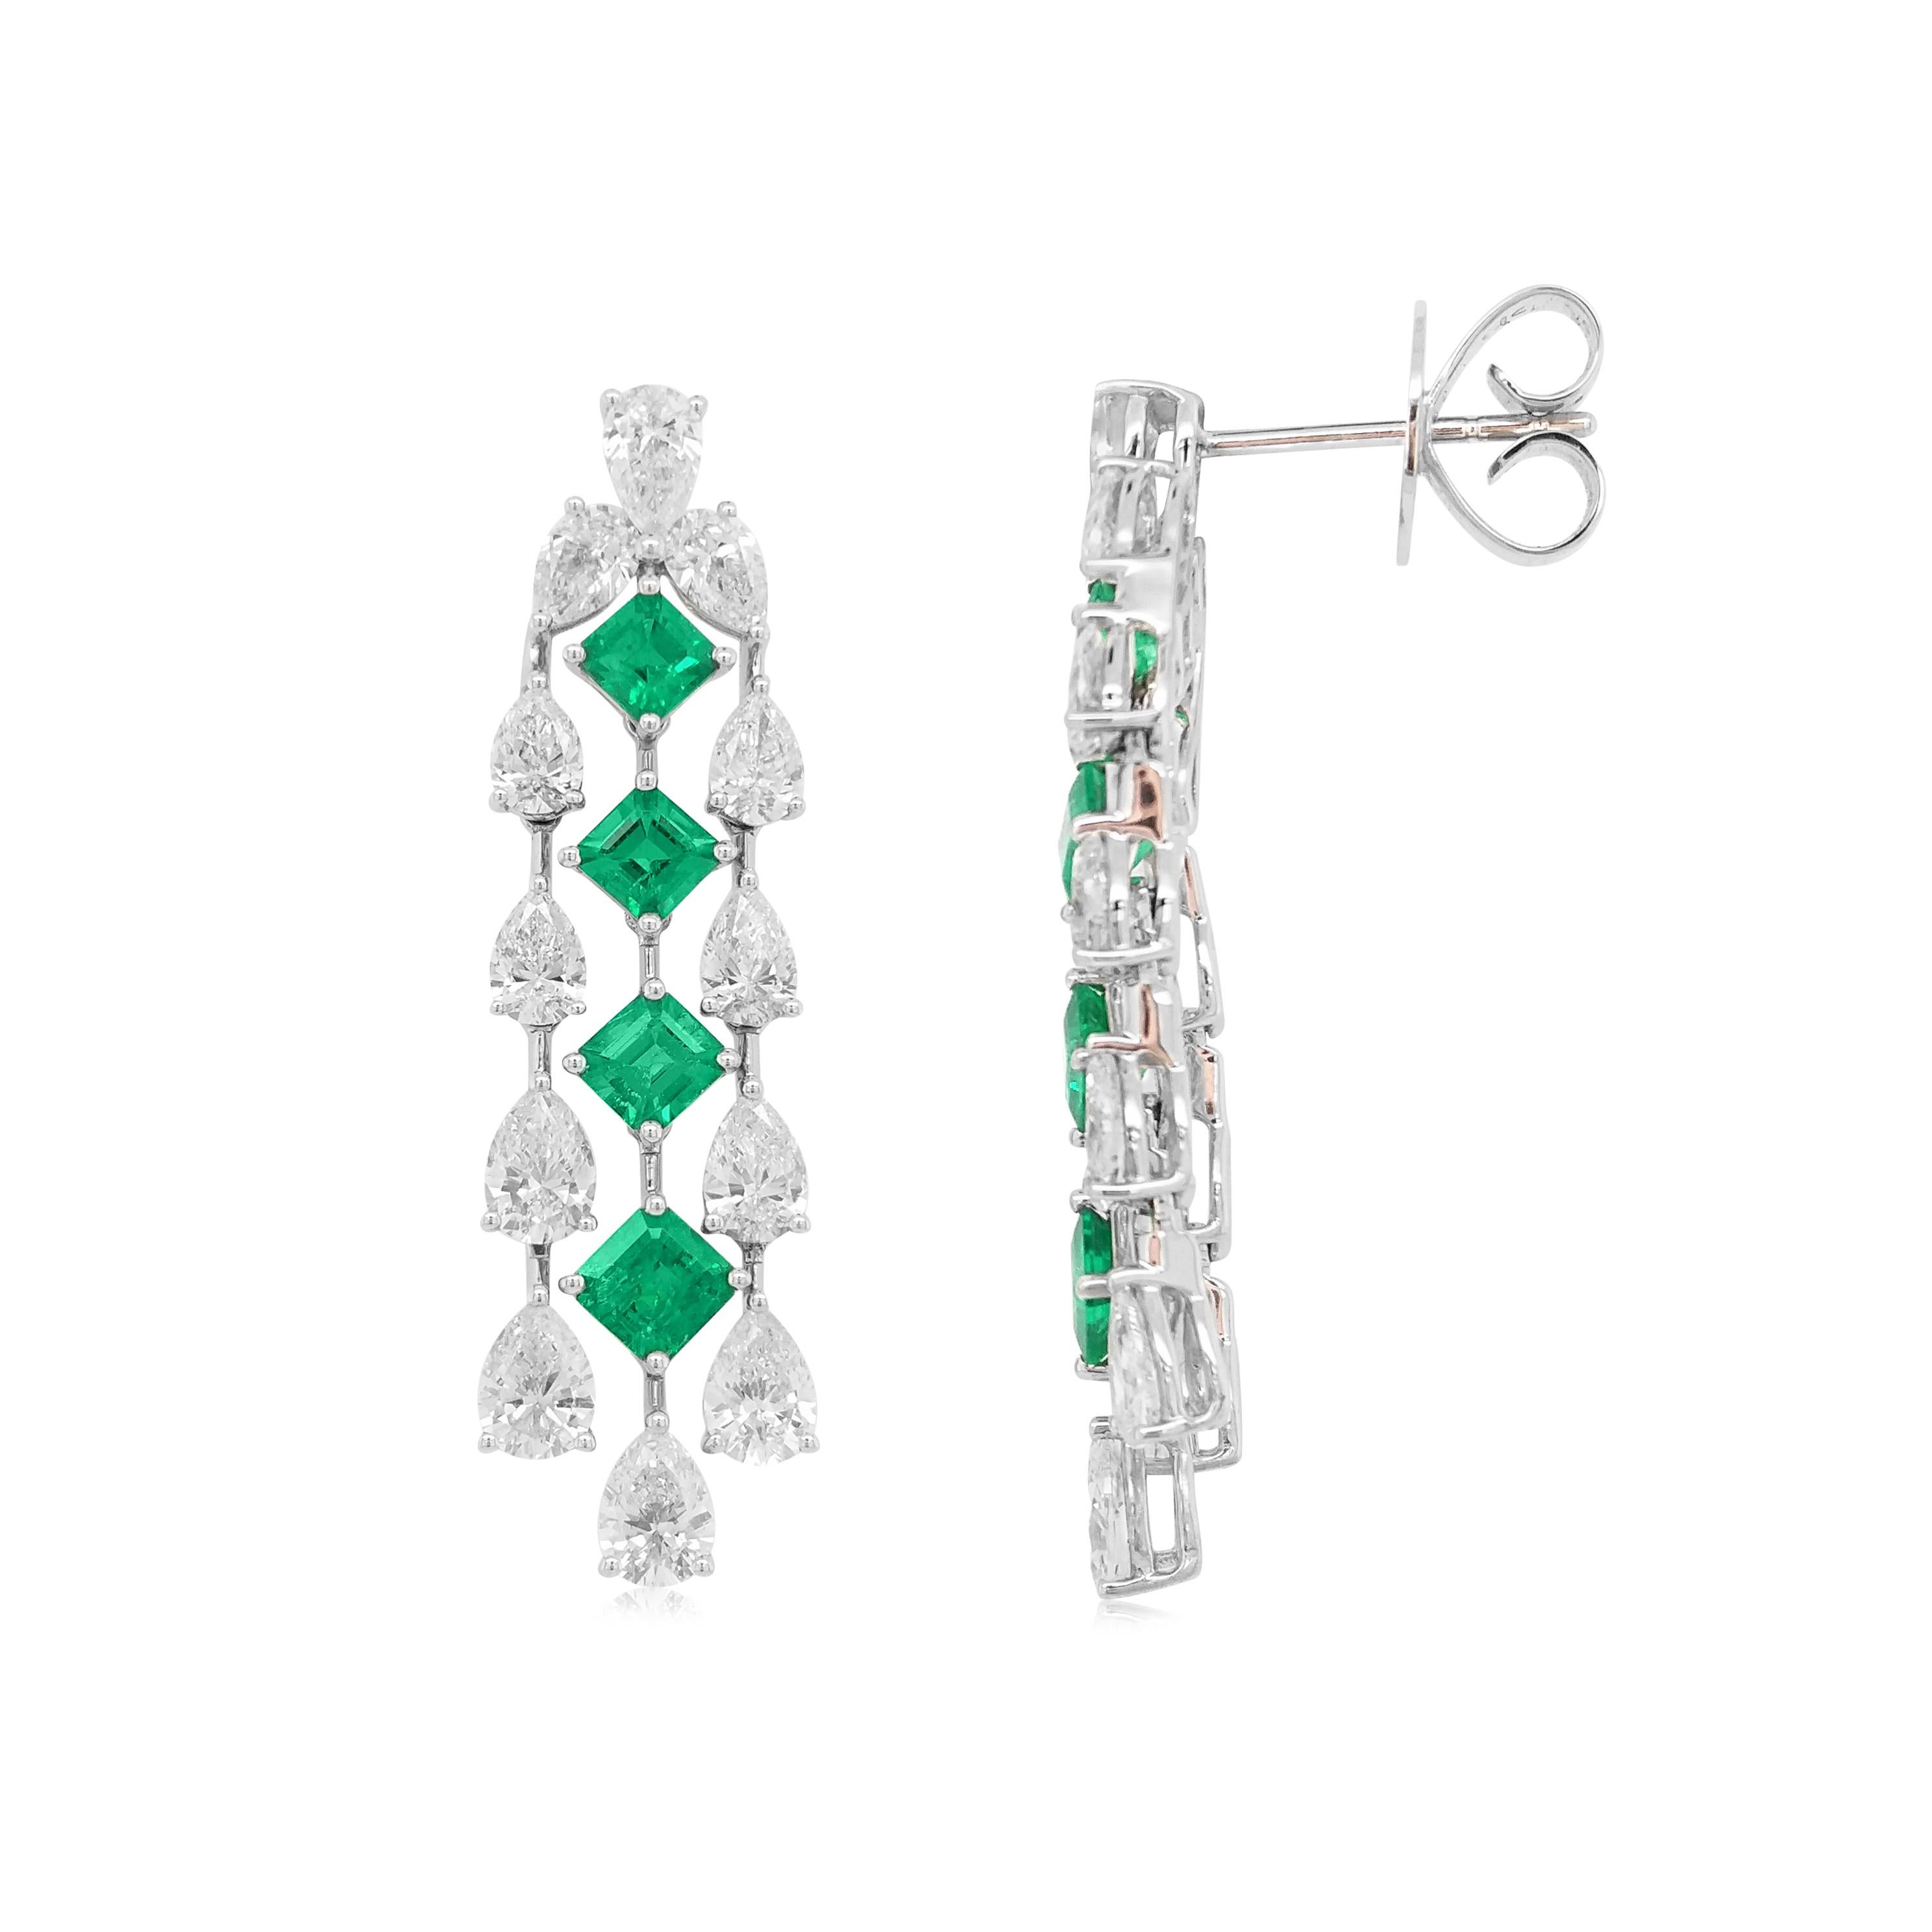 These elegant earrings feature beautiful Square-shaped Colombian Emeralds hanging with delicate streams of pear-shaped white diamonds. The 18 Karat white gold setting perfectly enriches the hue of the emerald and the bright sparkle of the diamonds.